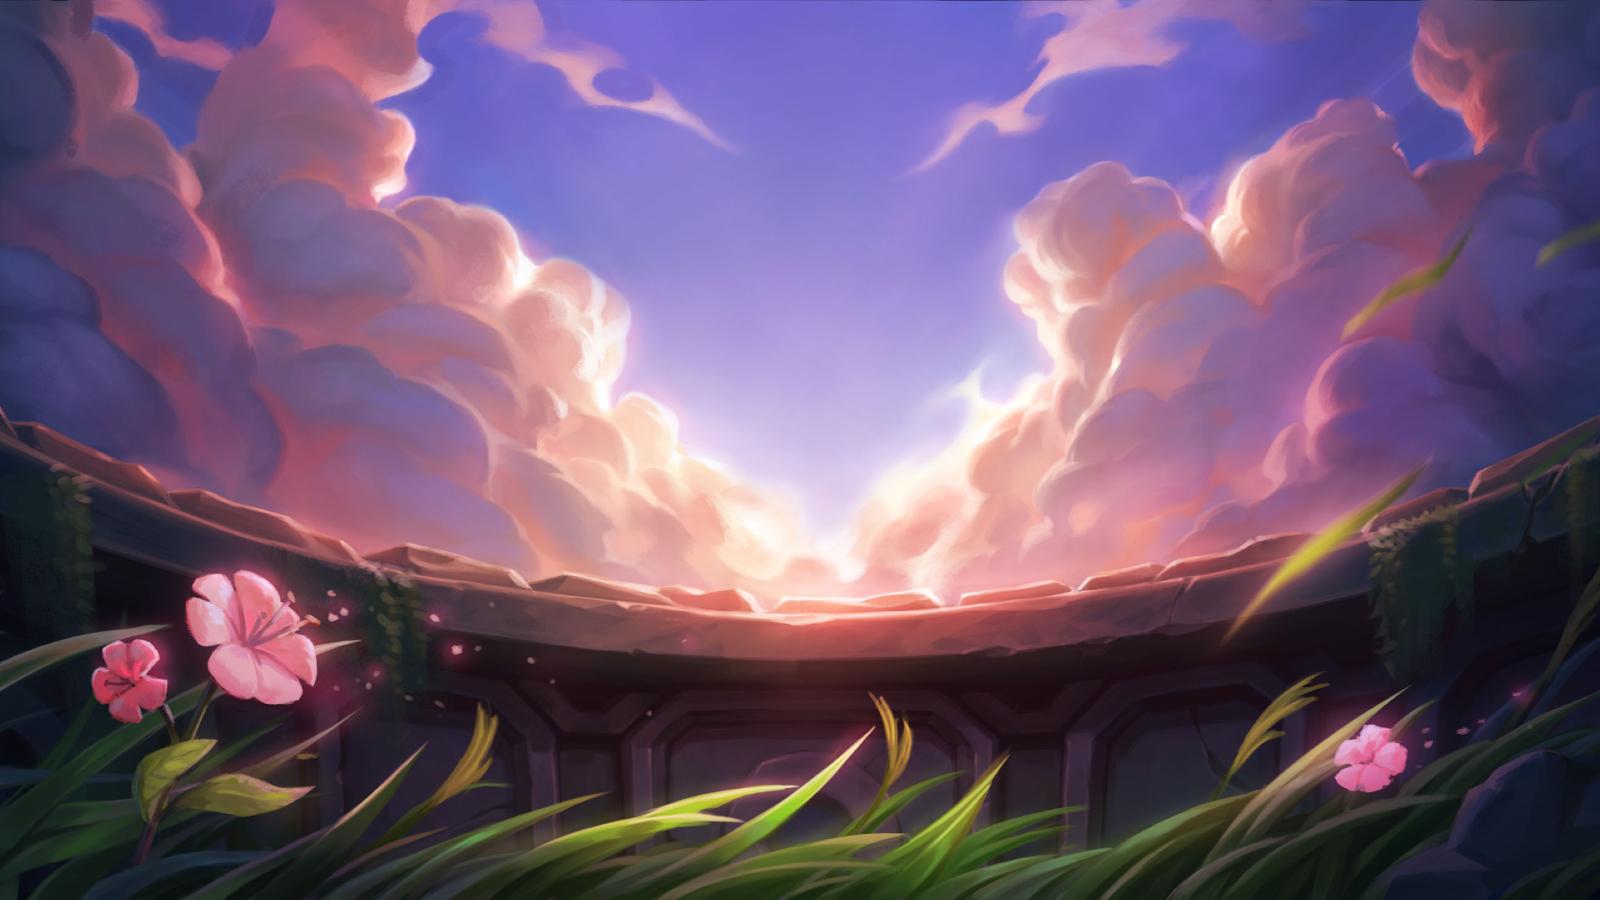 League of Legends Community Expresses Frustration Following World